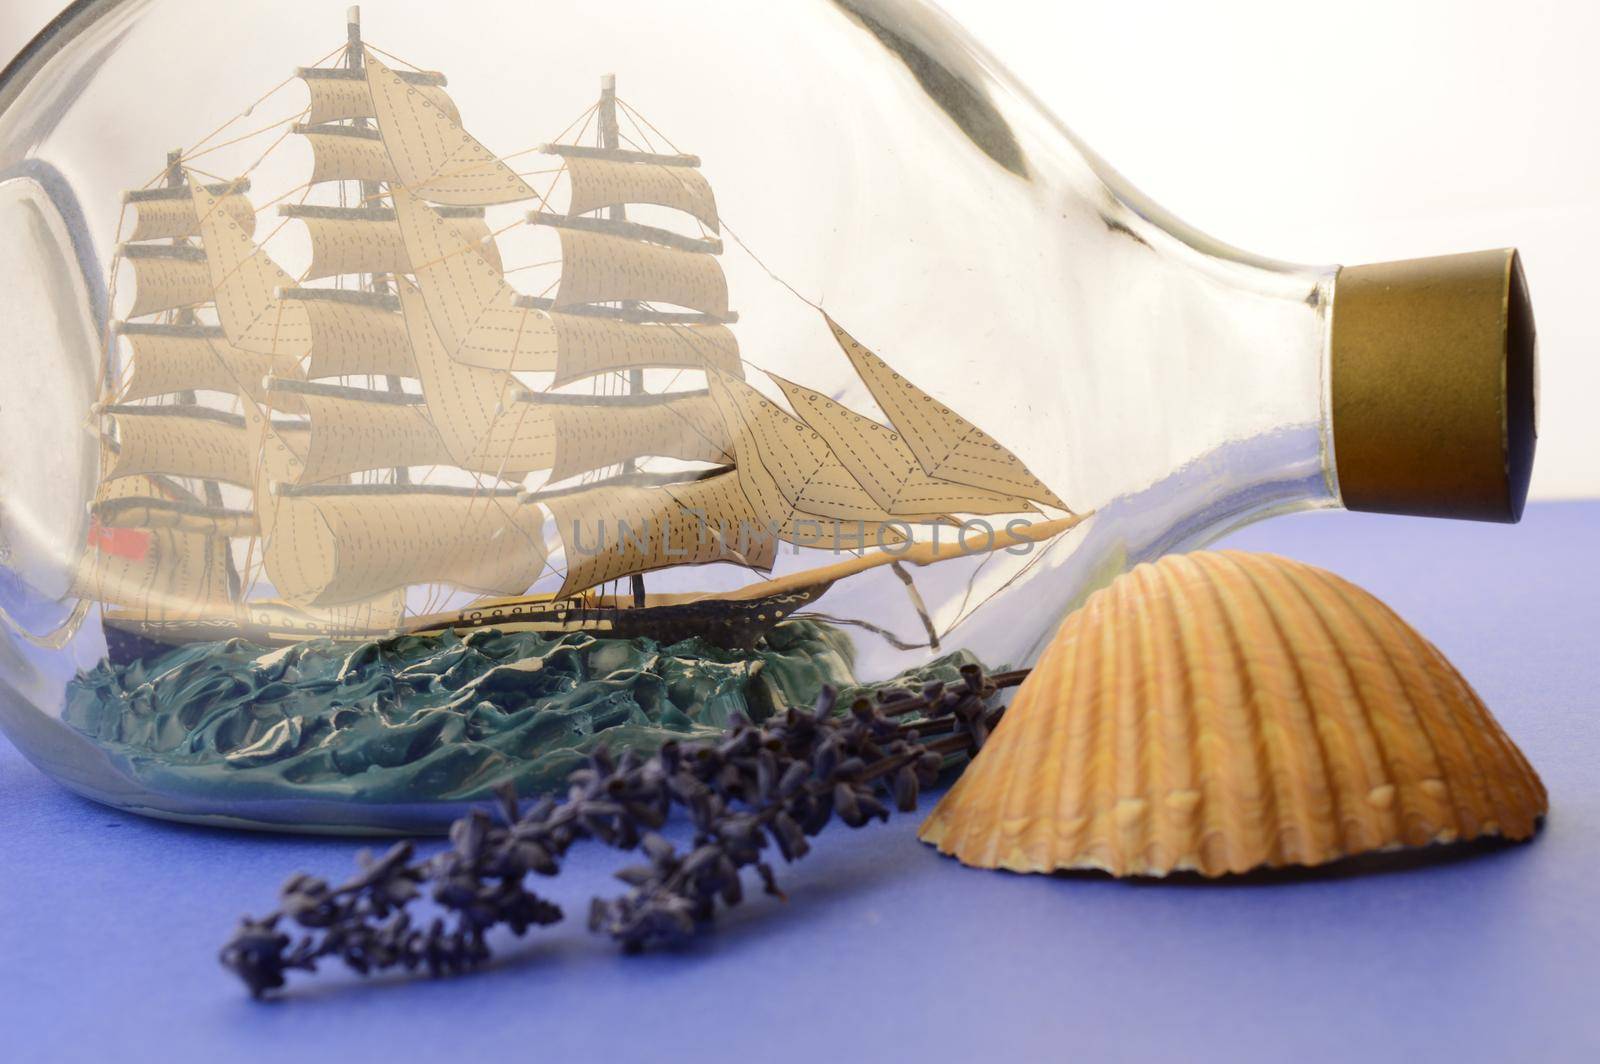 A calming scene of blues and a anutical ship in a bottle with a seashell and lavender.